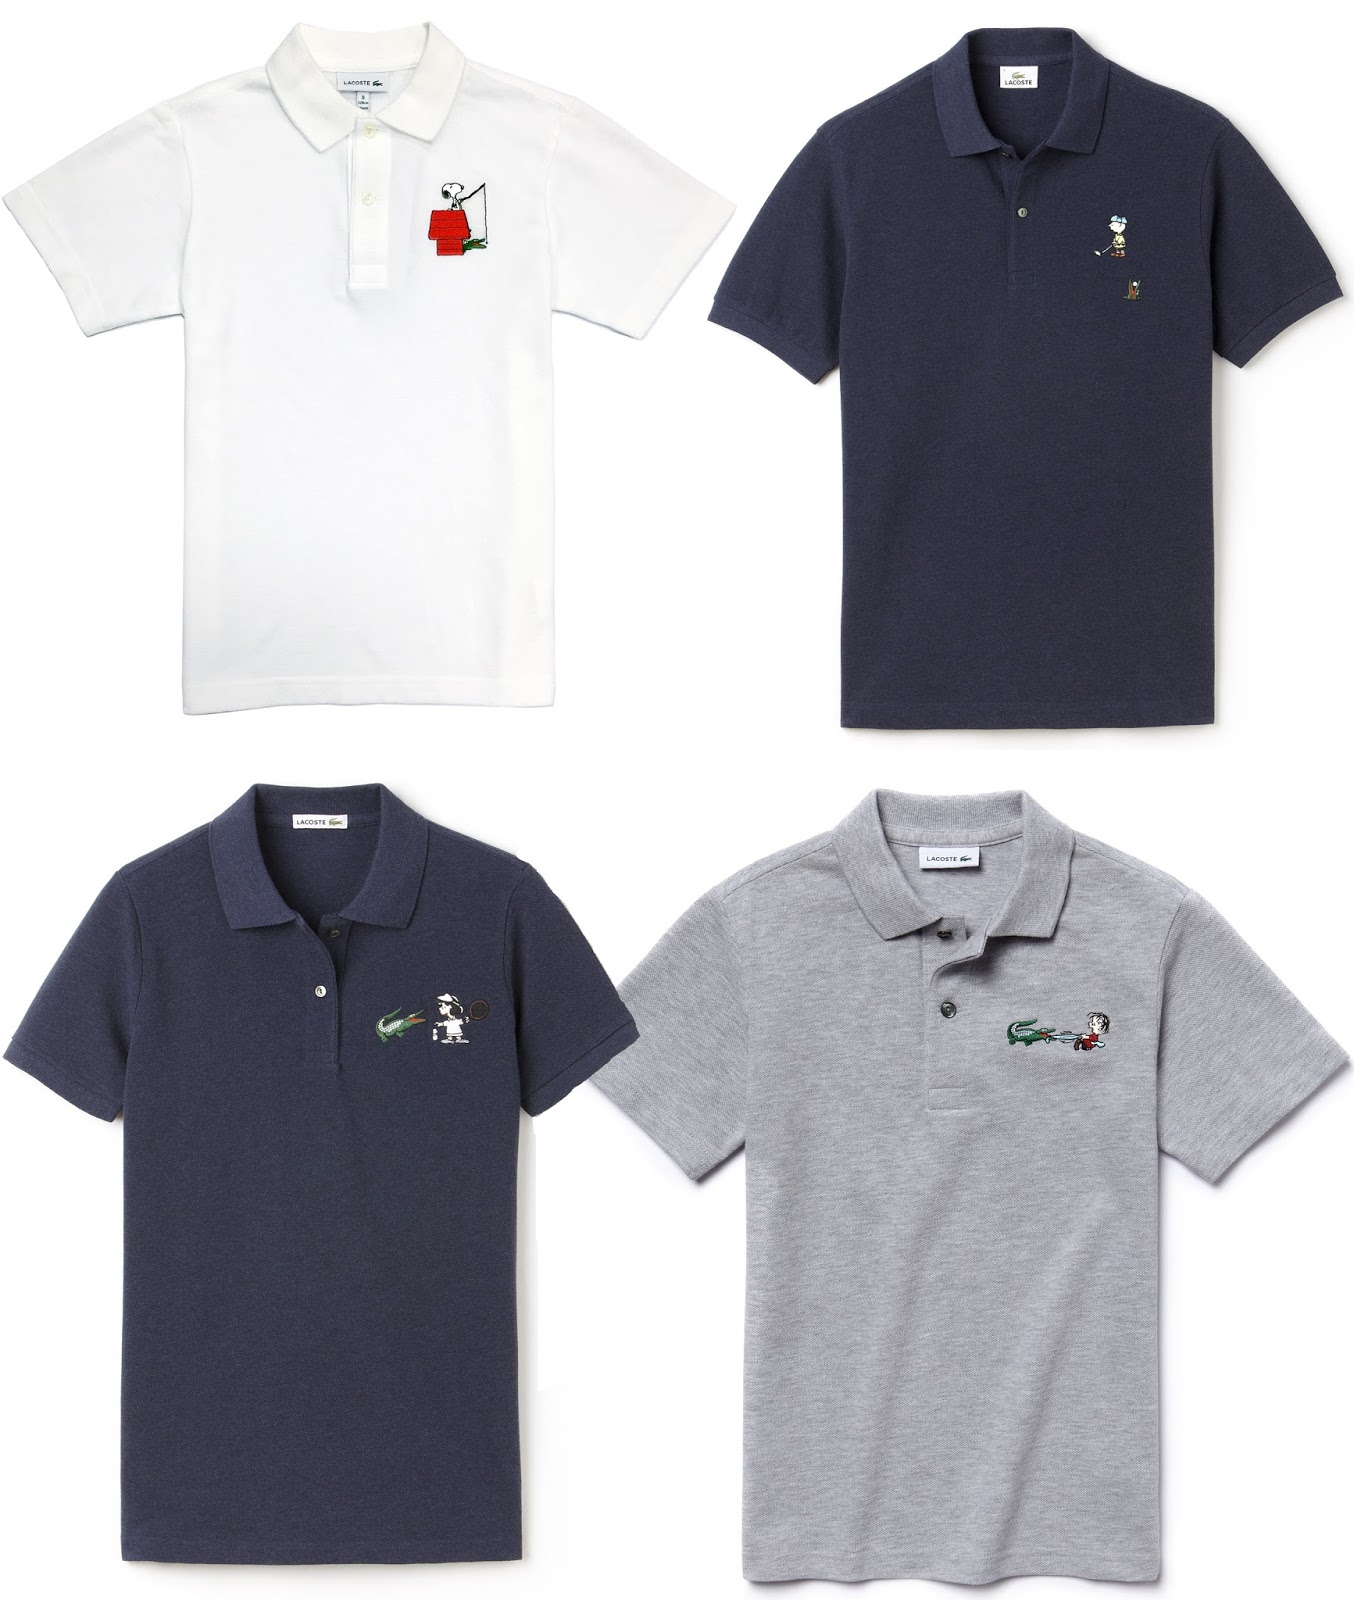 The Blot Says Peanuts X Lacoste 15 Polo Collection